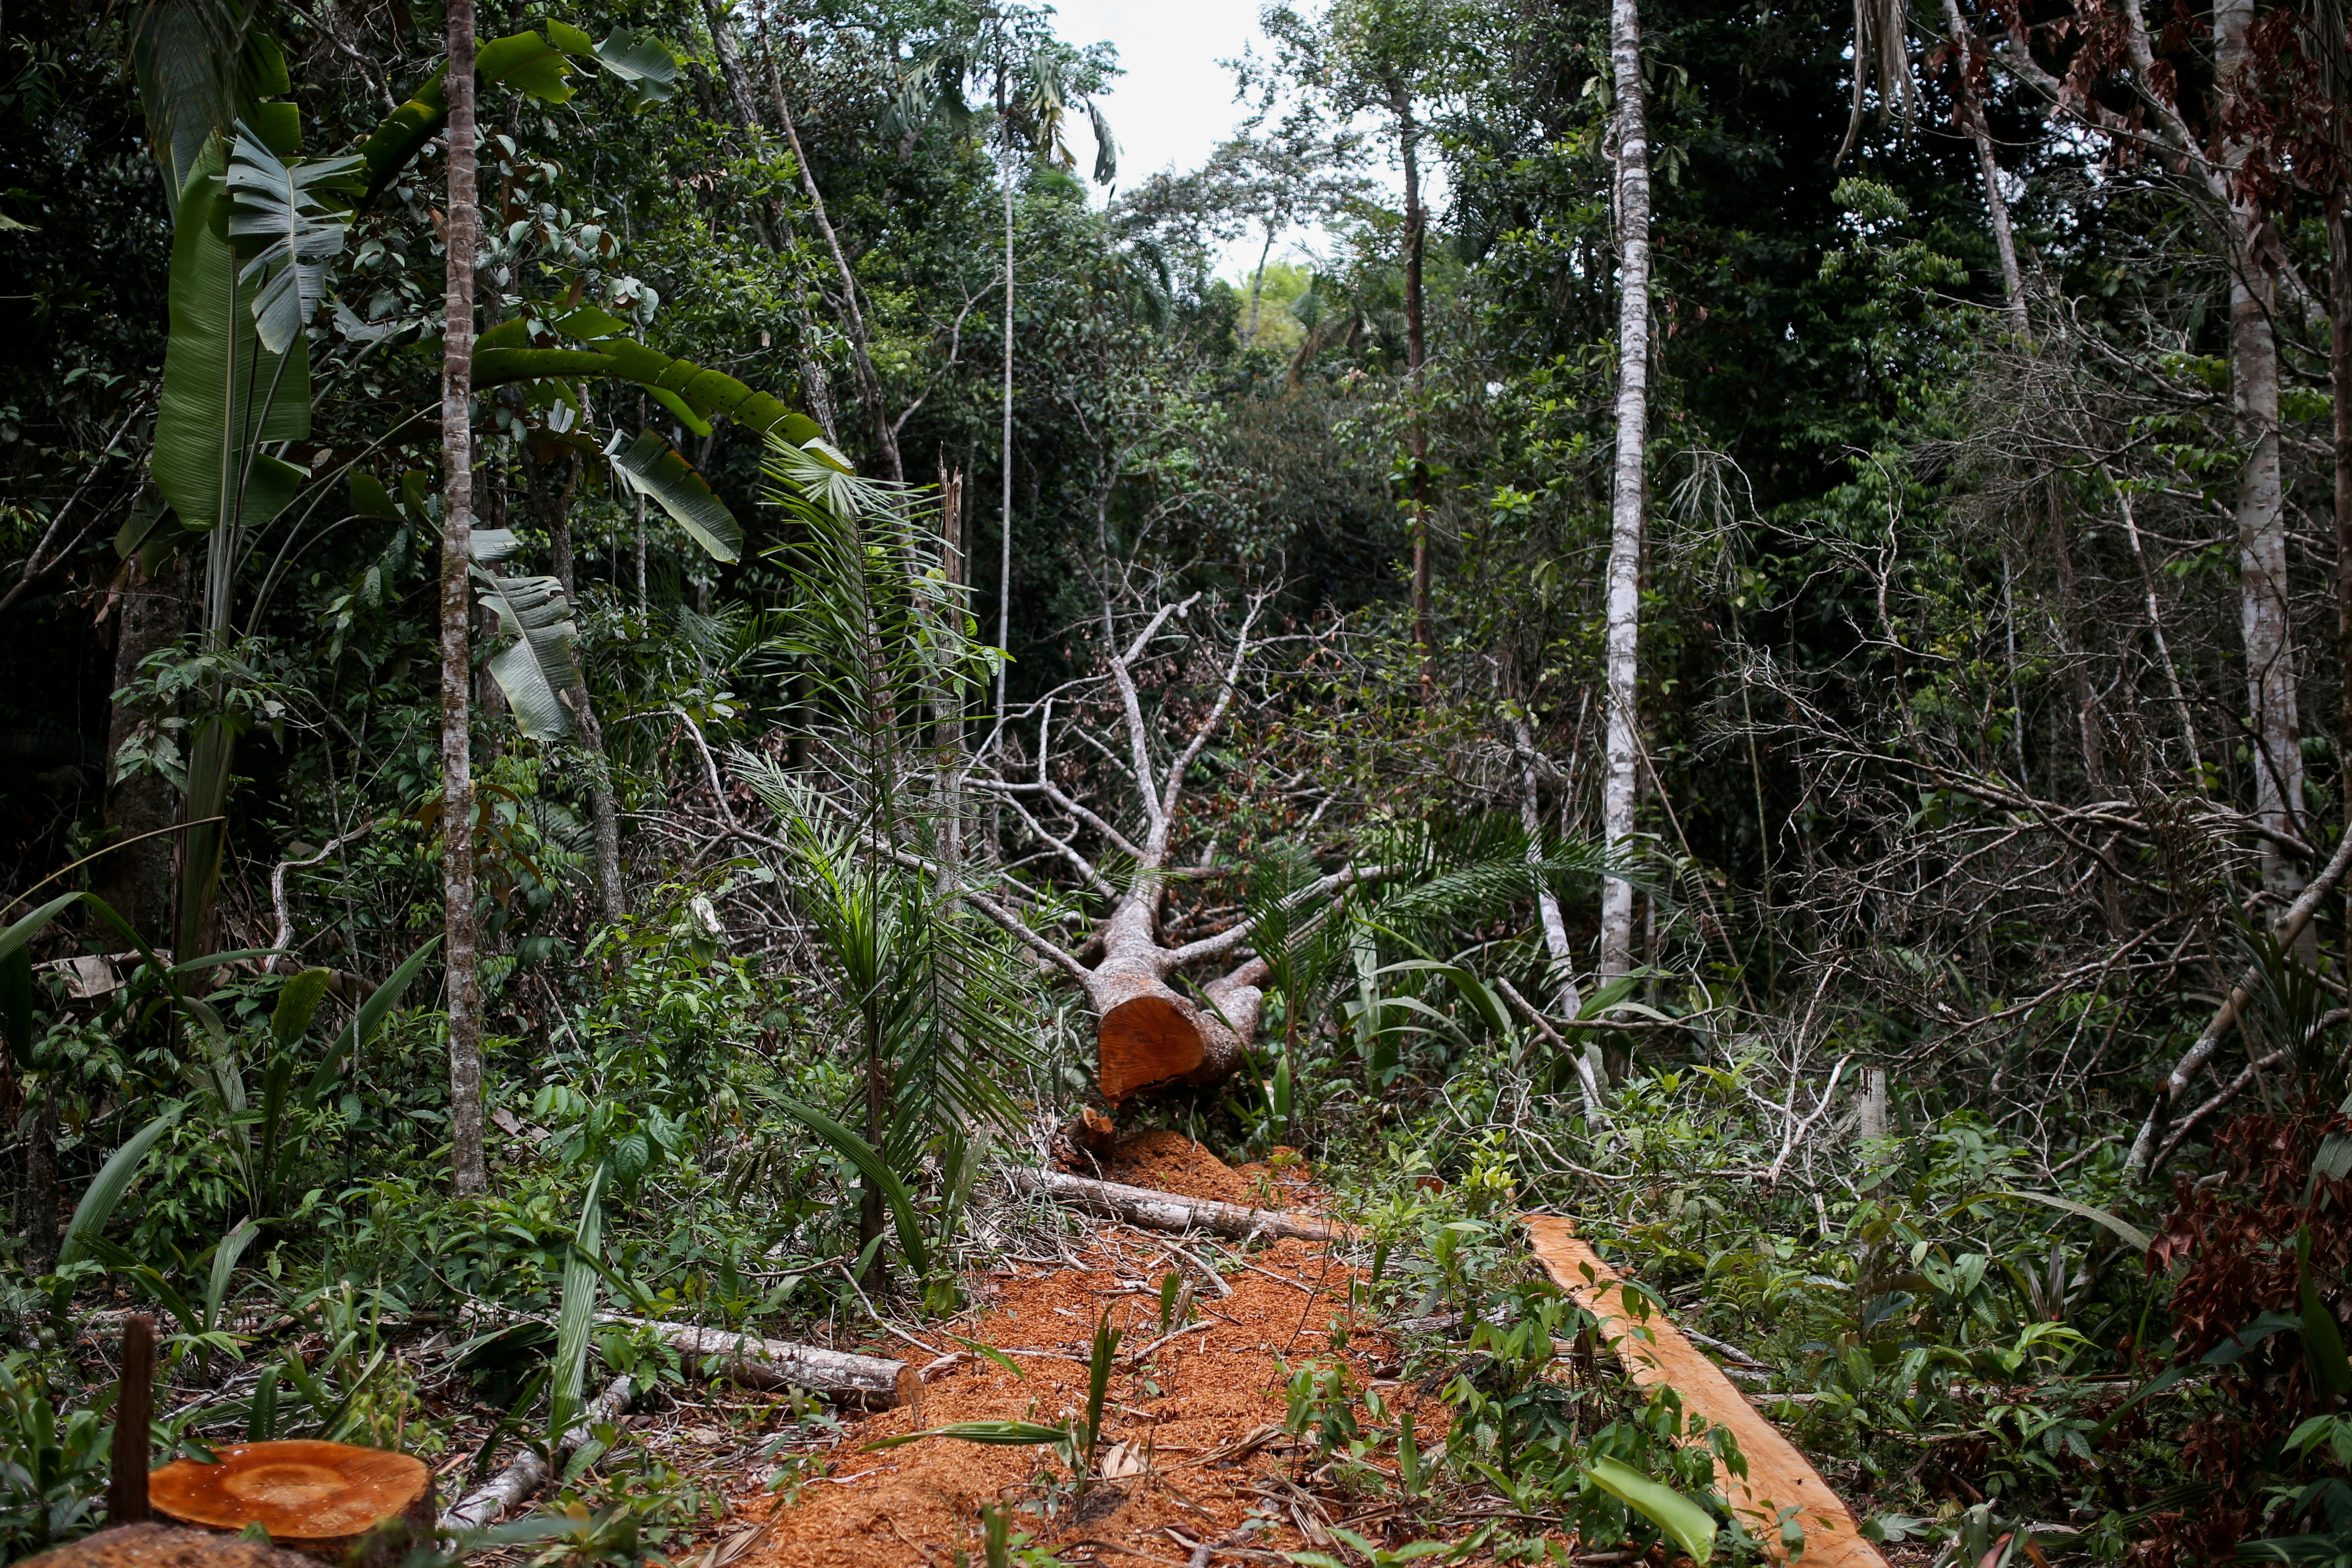 A felled tree is seen in the middle of a deforested area of the Yari plains, in Caqueta